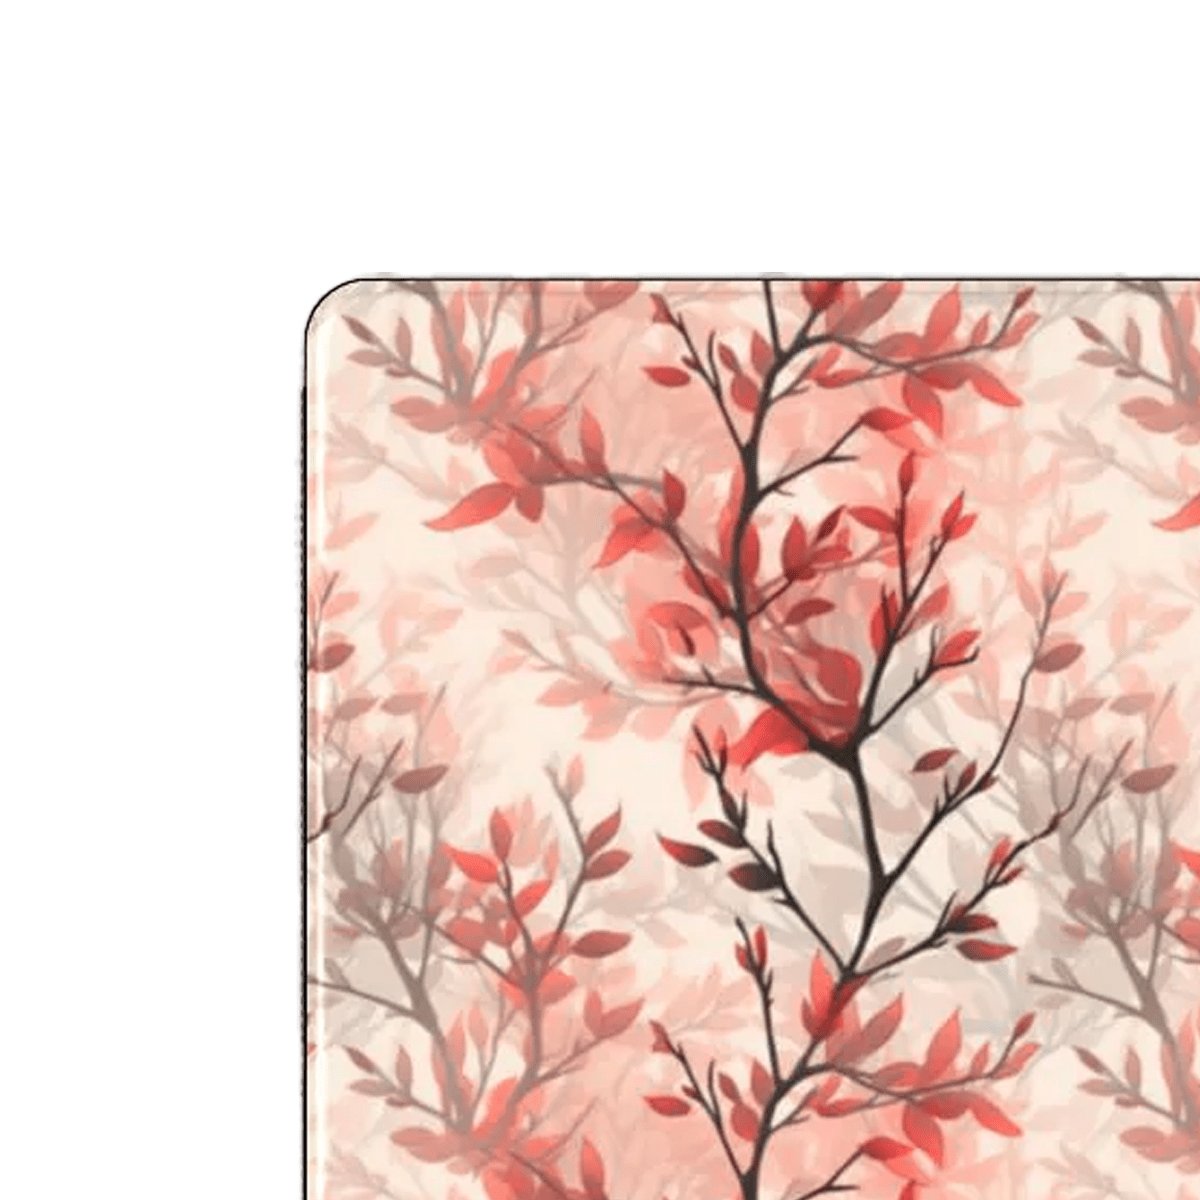 An iPad case featuring a red bud tree blossom pattern on top of a salmon coloured background.